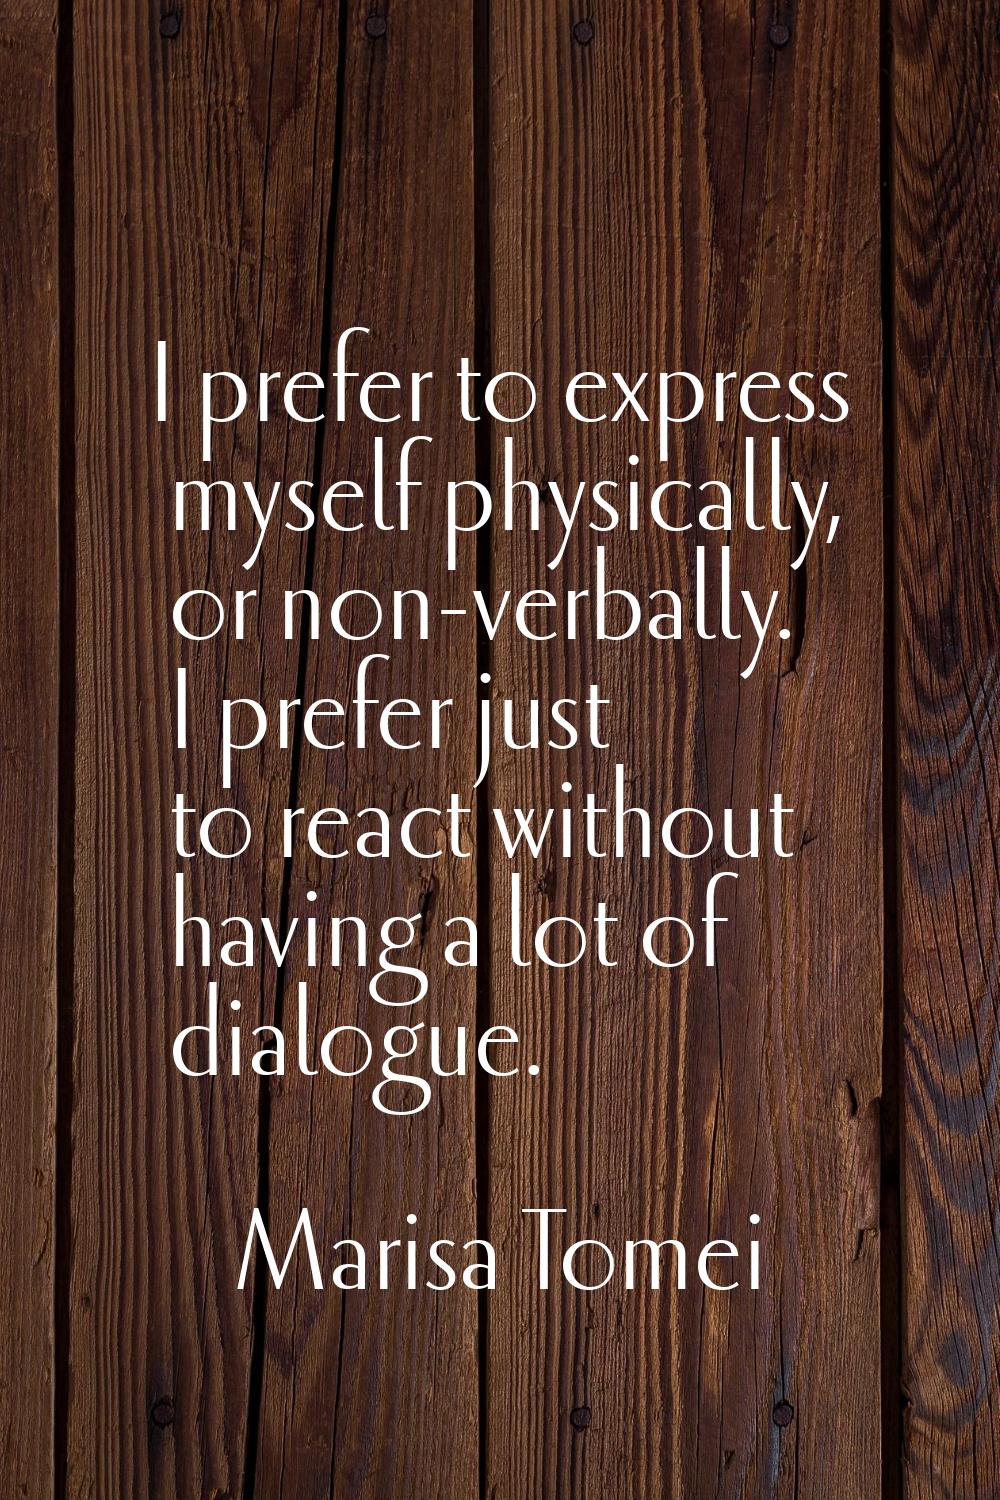 I prefer to express myself physically, or non-verbally. I prefer just to react without having a lot